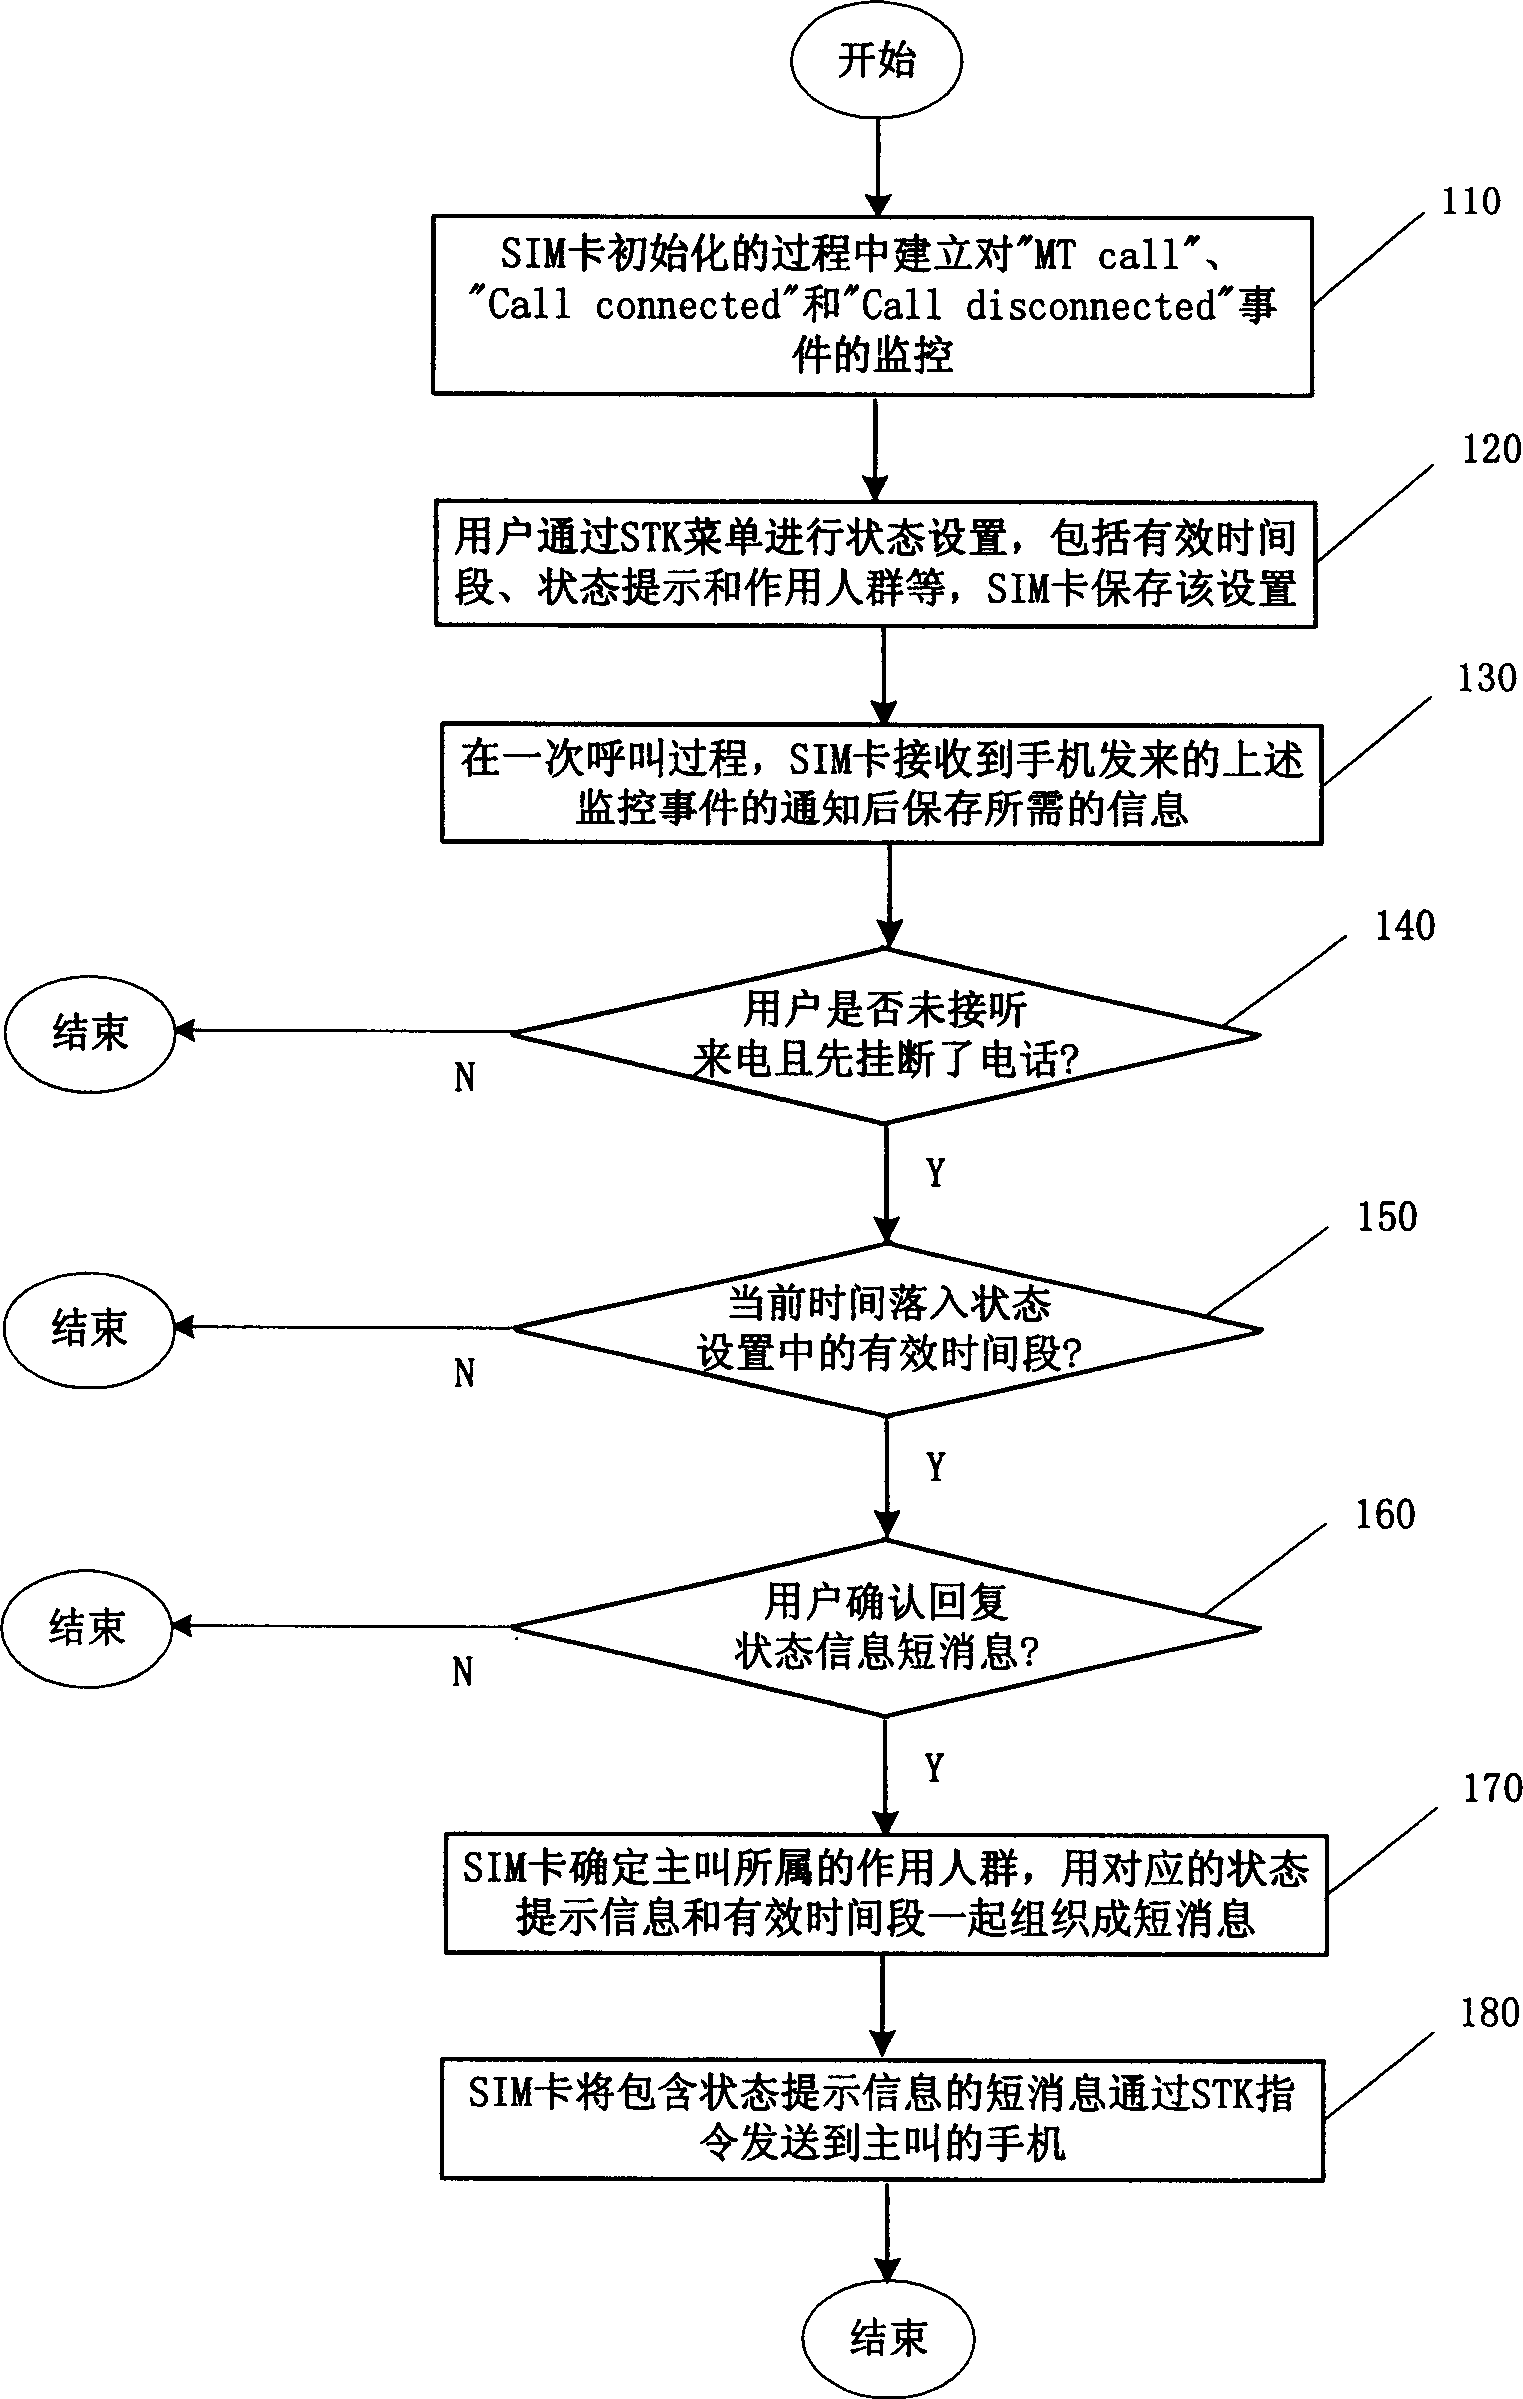 Method for automatic return of mobile user condition information and relatice user identifying module